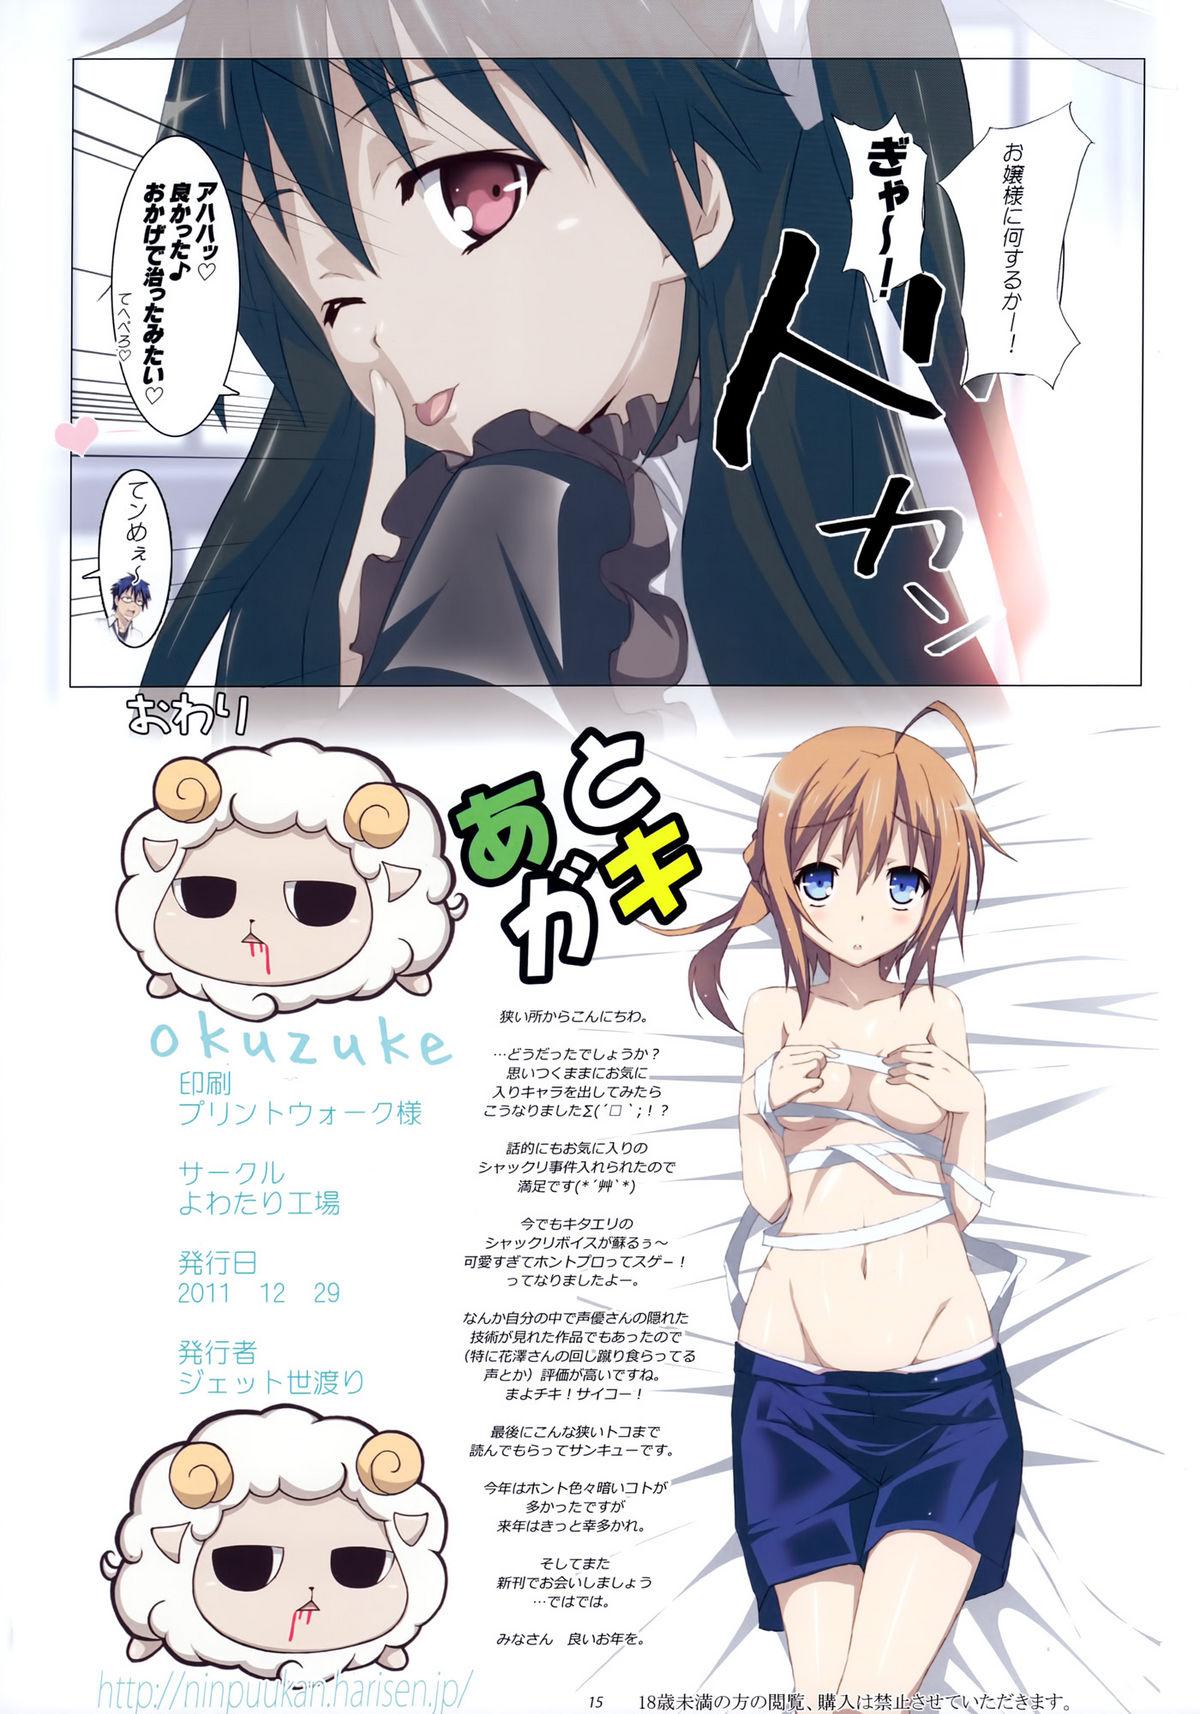 Awesome Love Chiki! - Mayo chiki Spoon - Page 14